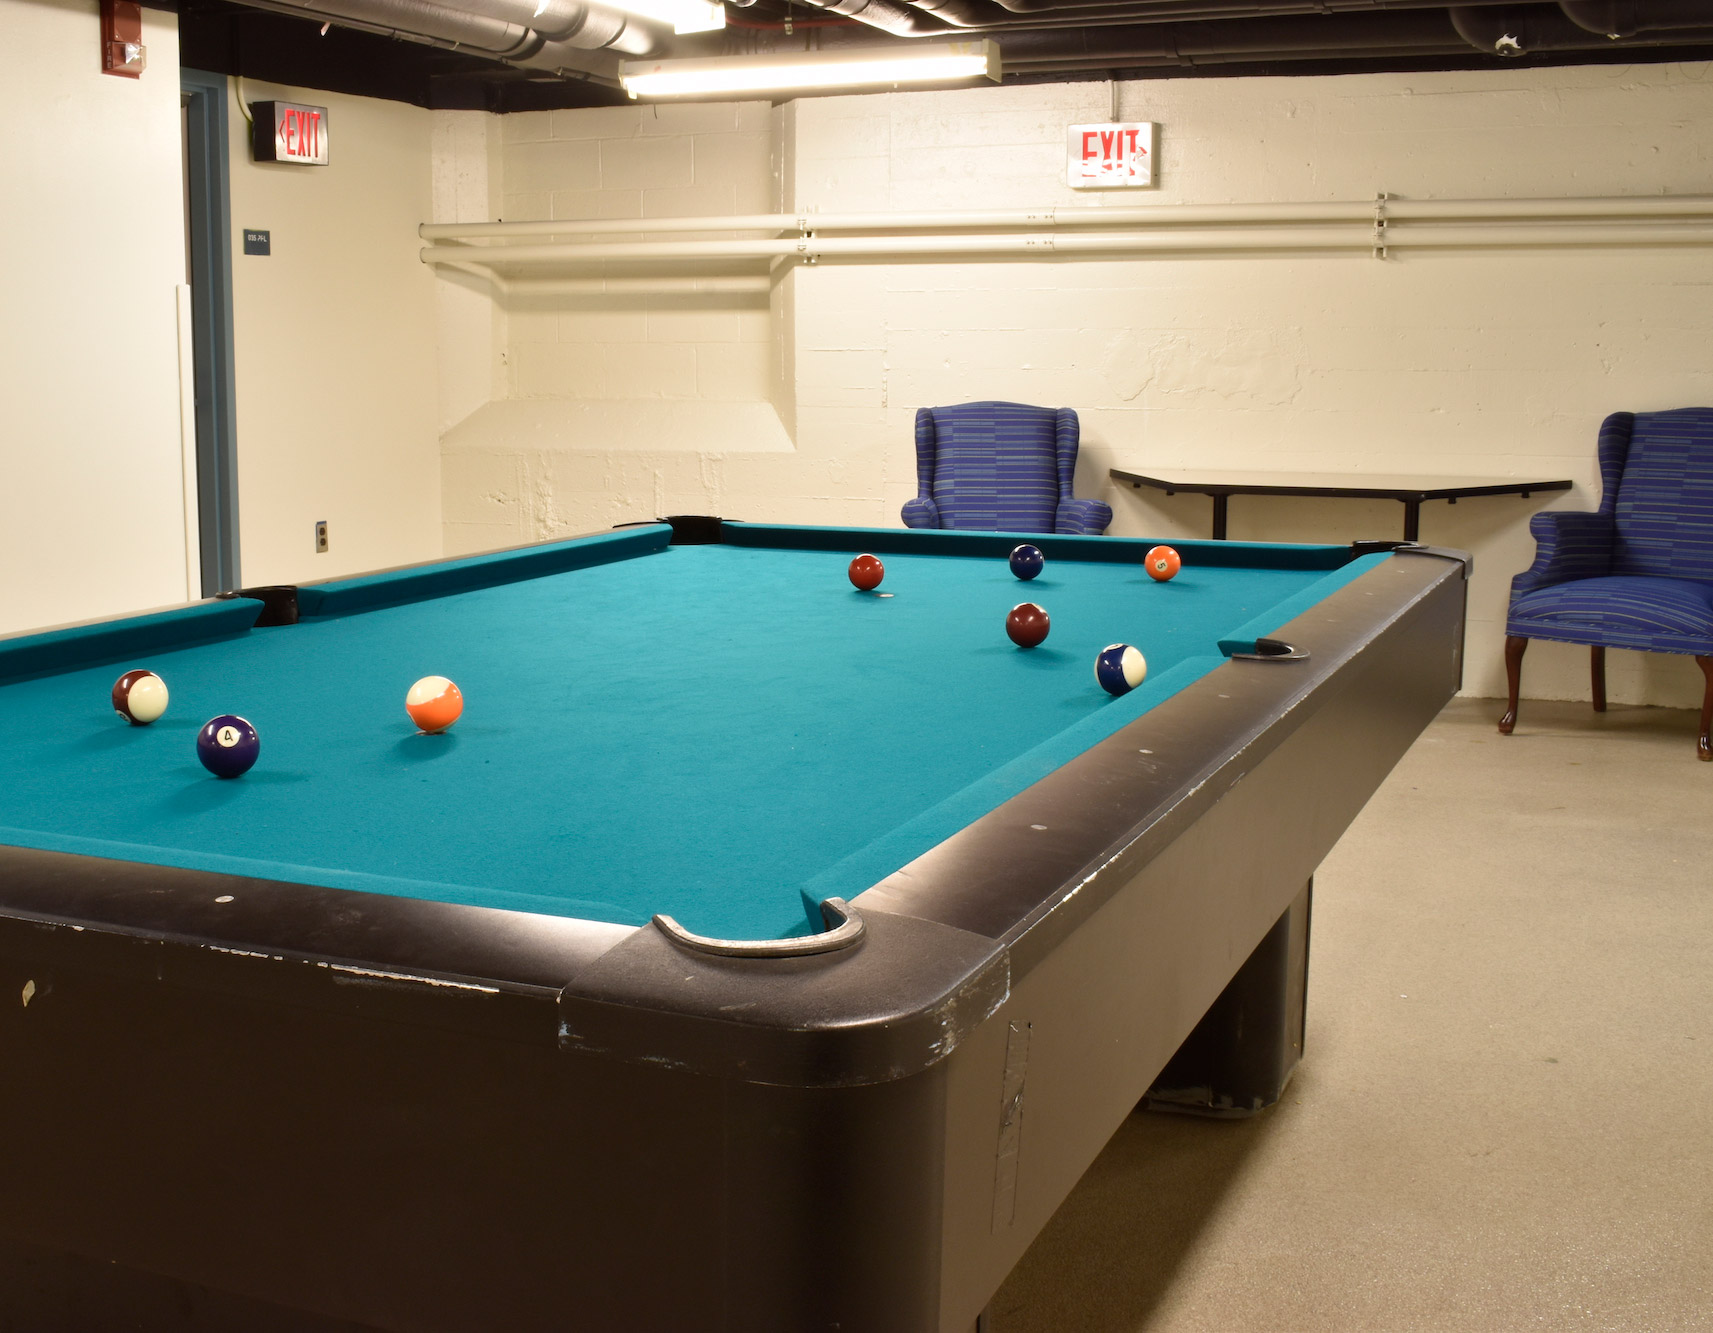 A pool table with seating in the background